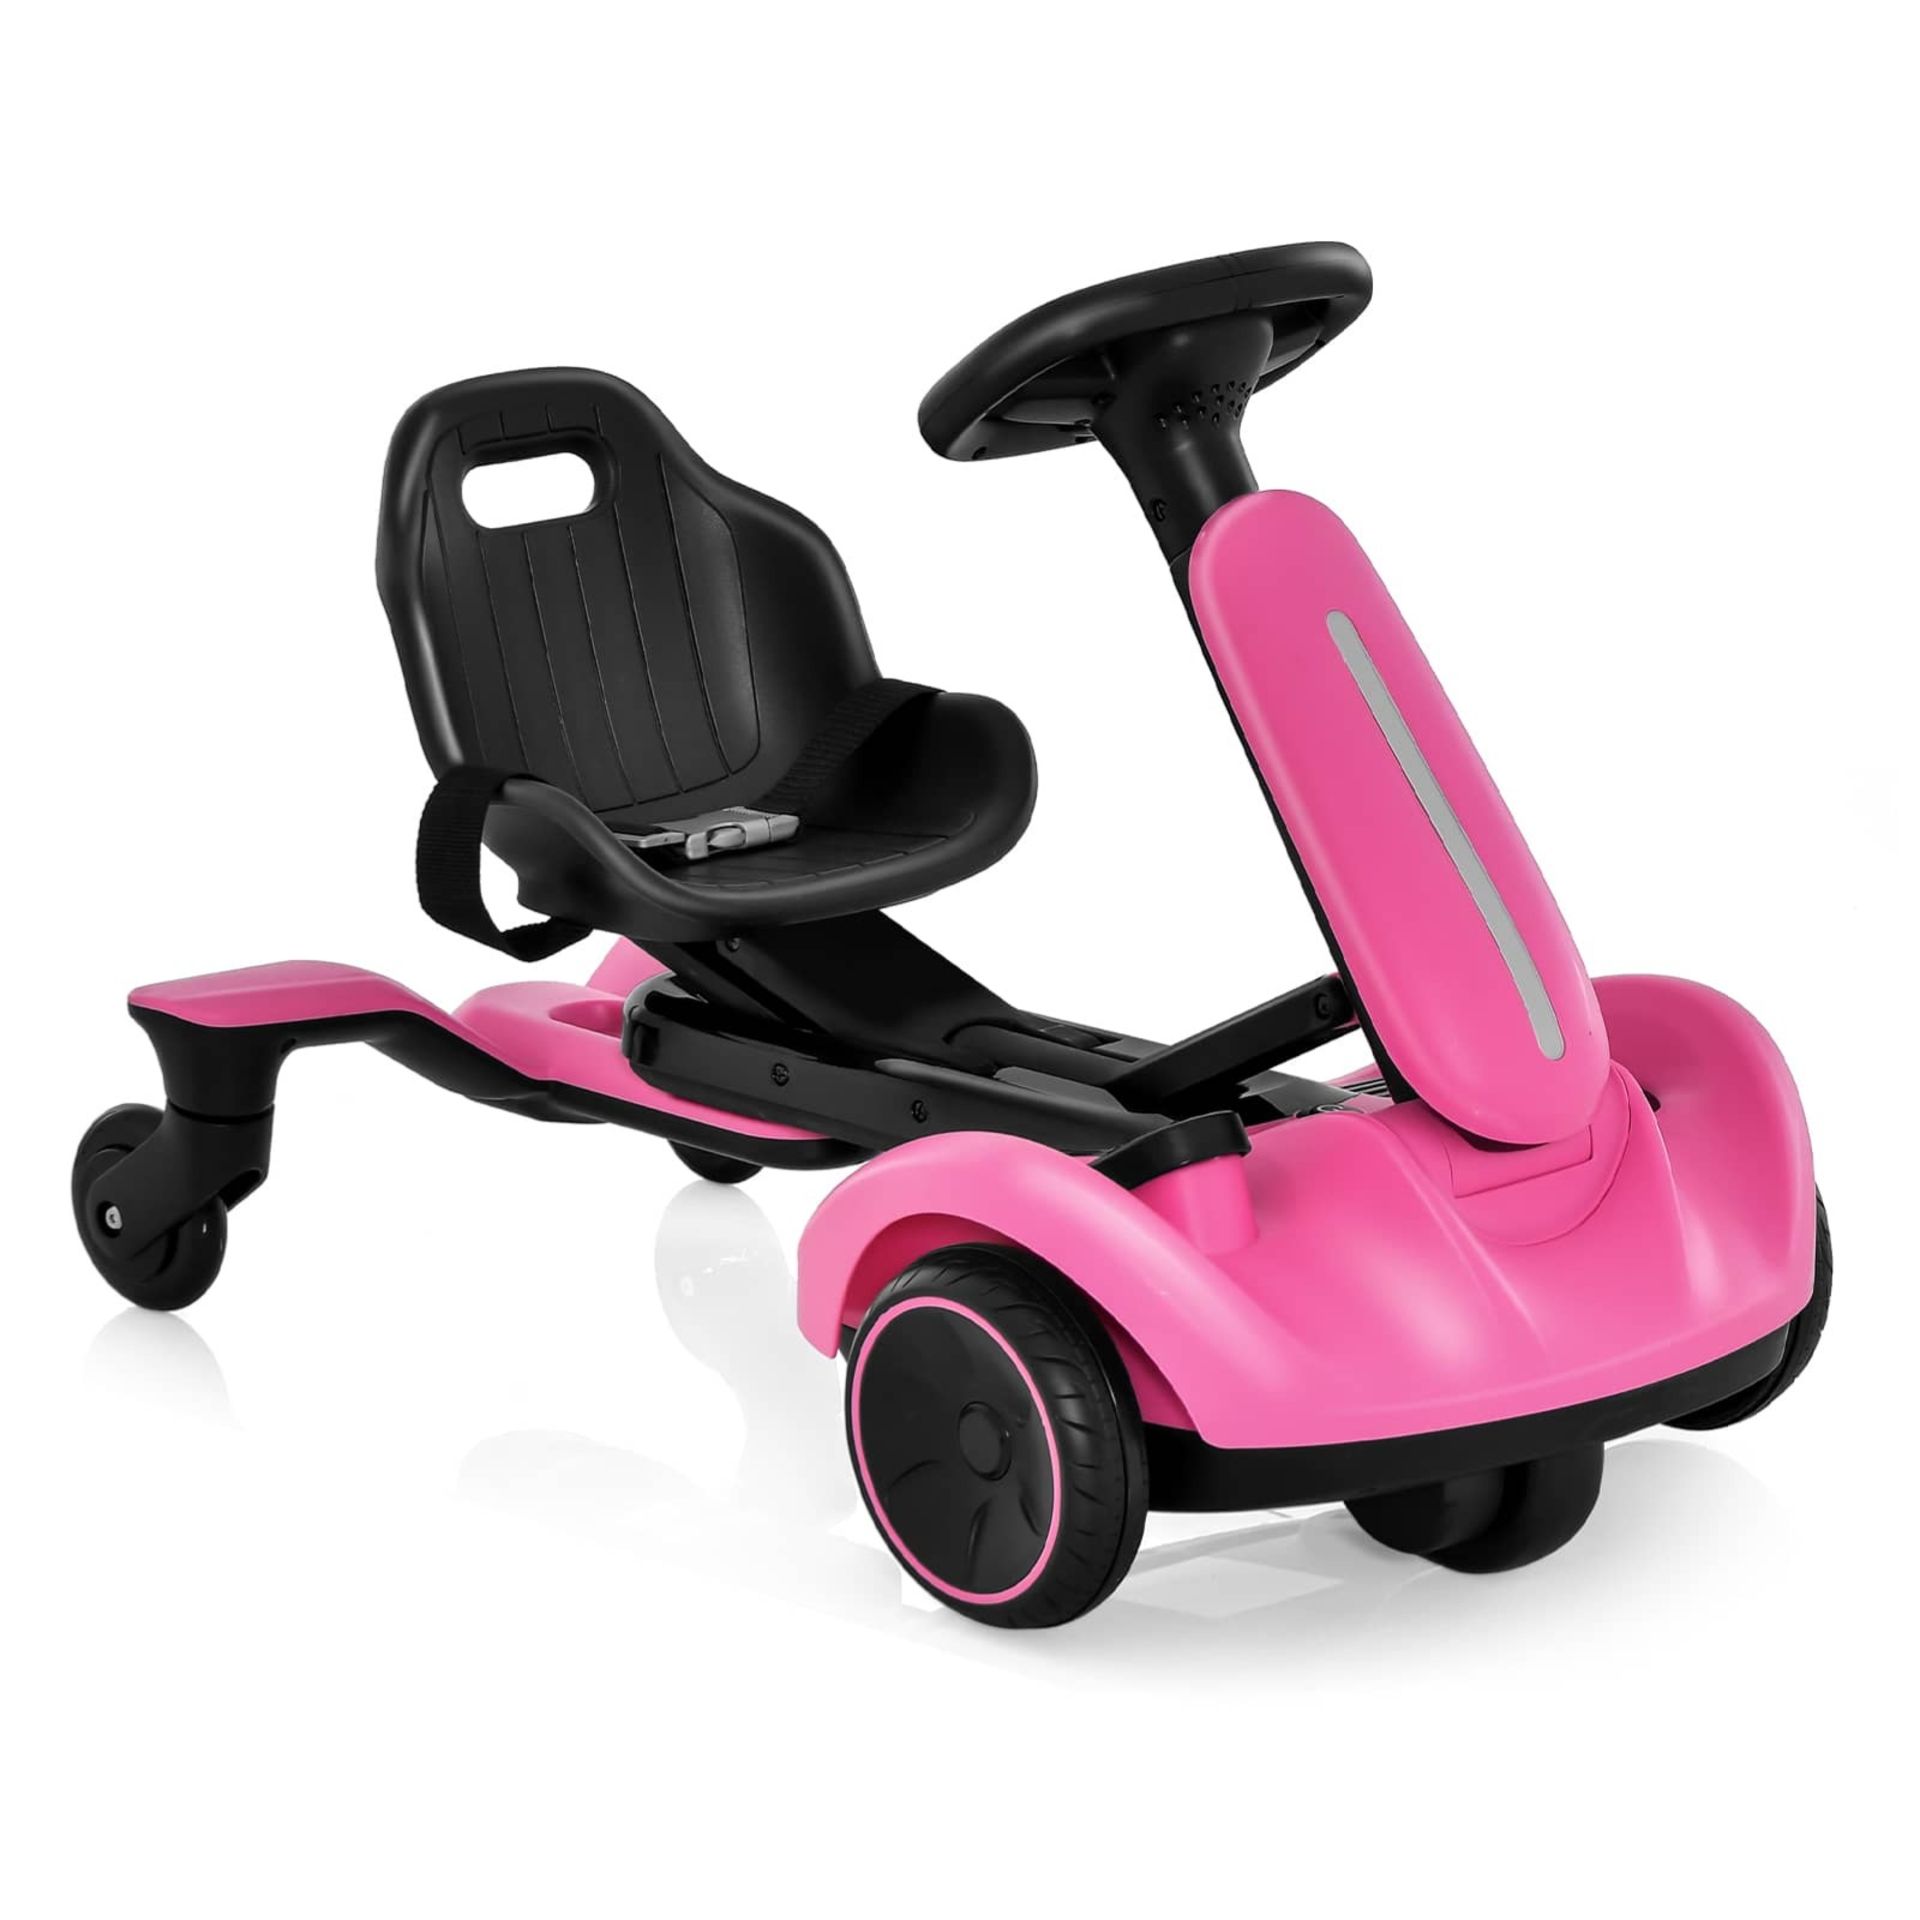 6V Electric Ride on Drift Car for Kids Aged 3-8 Years Old-Pink - ER54